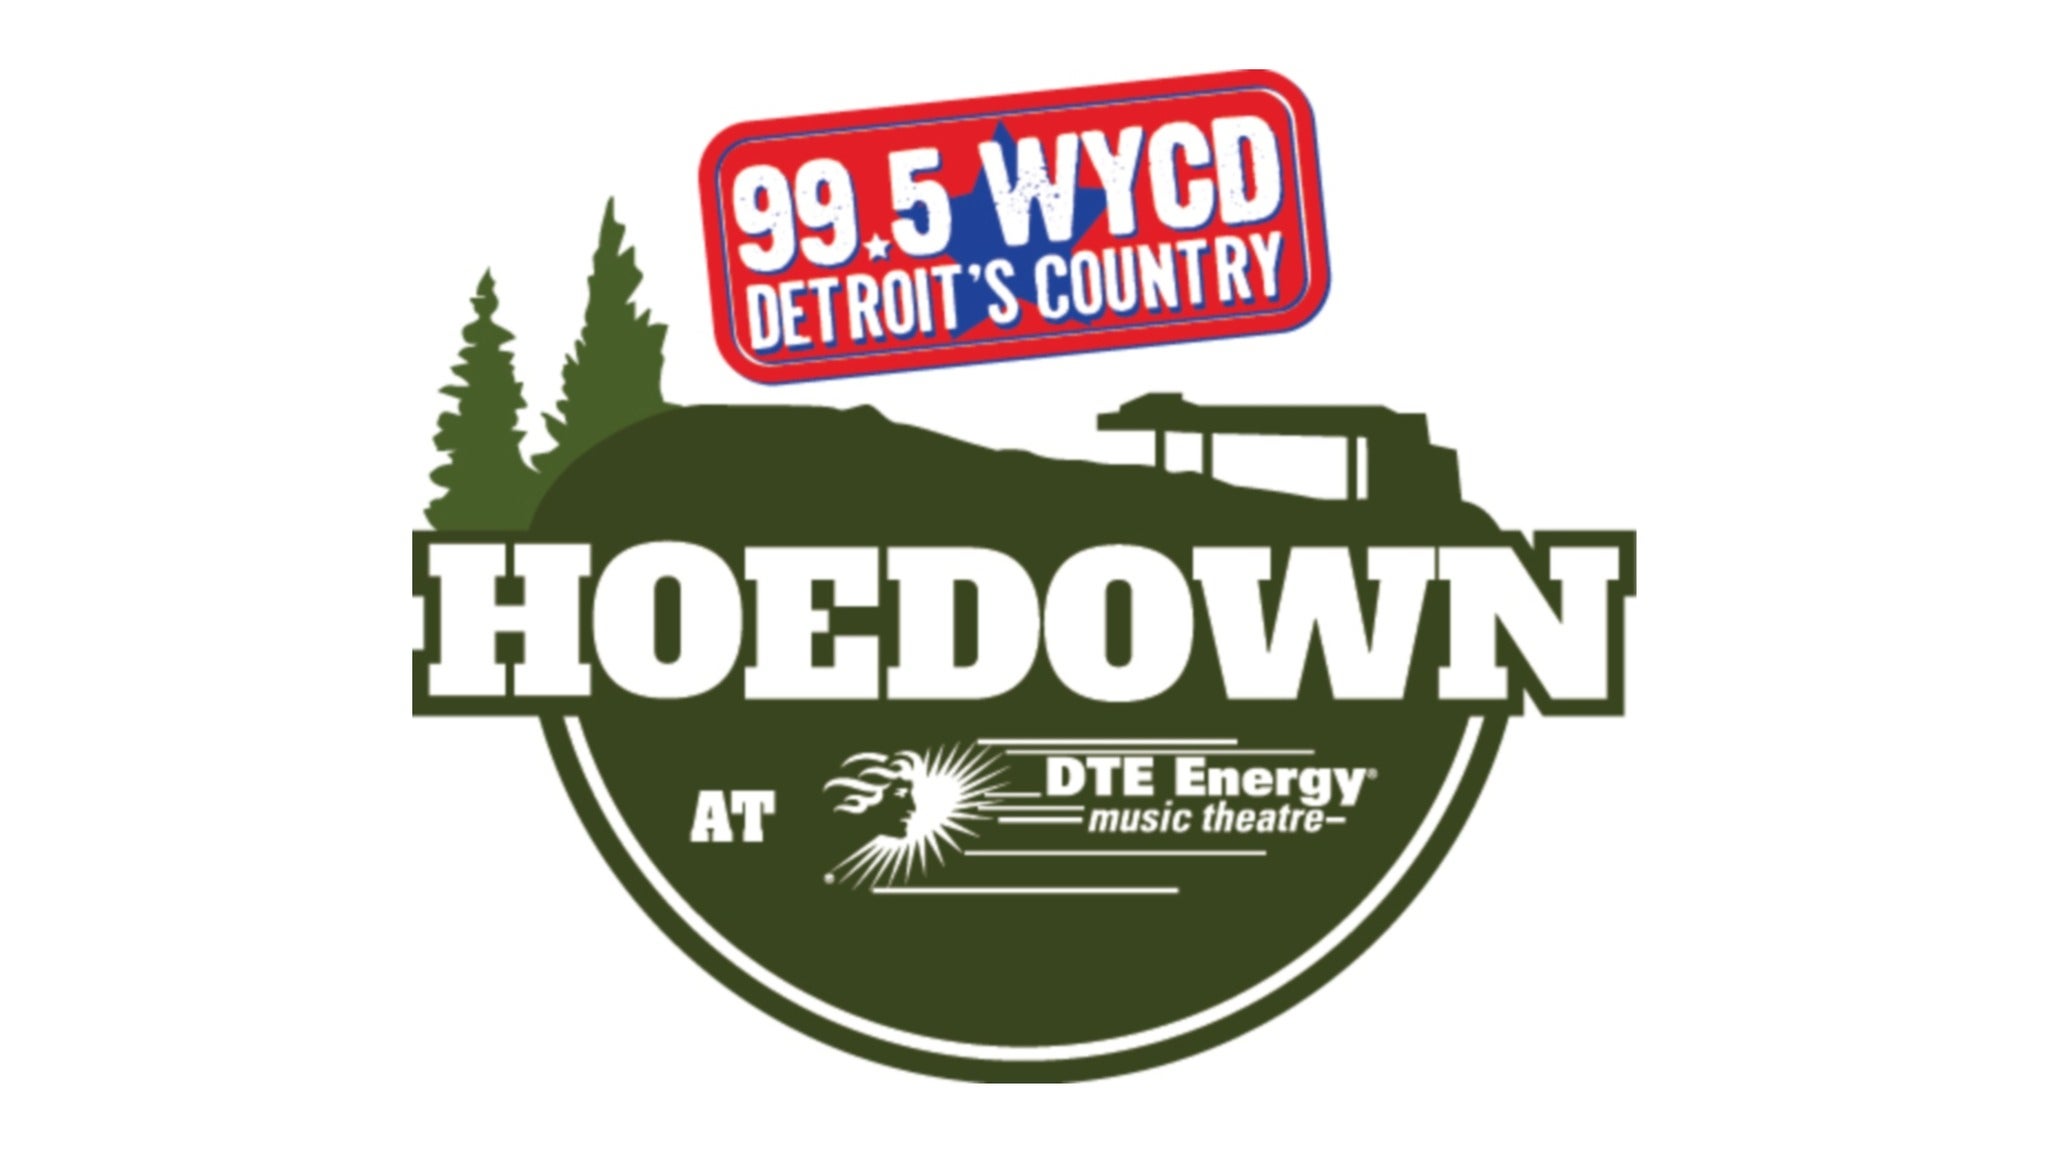 99.5 WYCD Hoedown Featuring Lady A